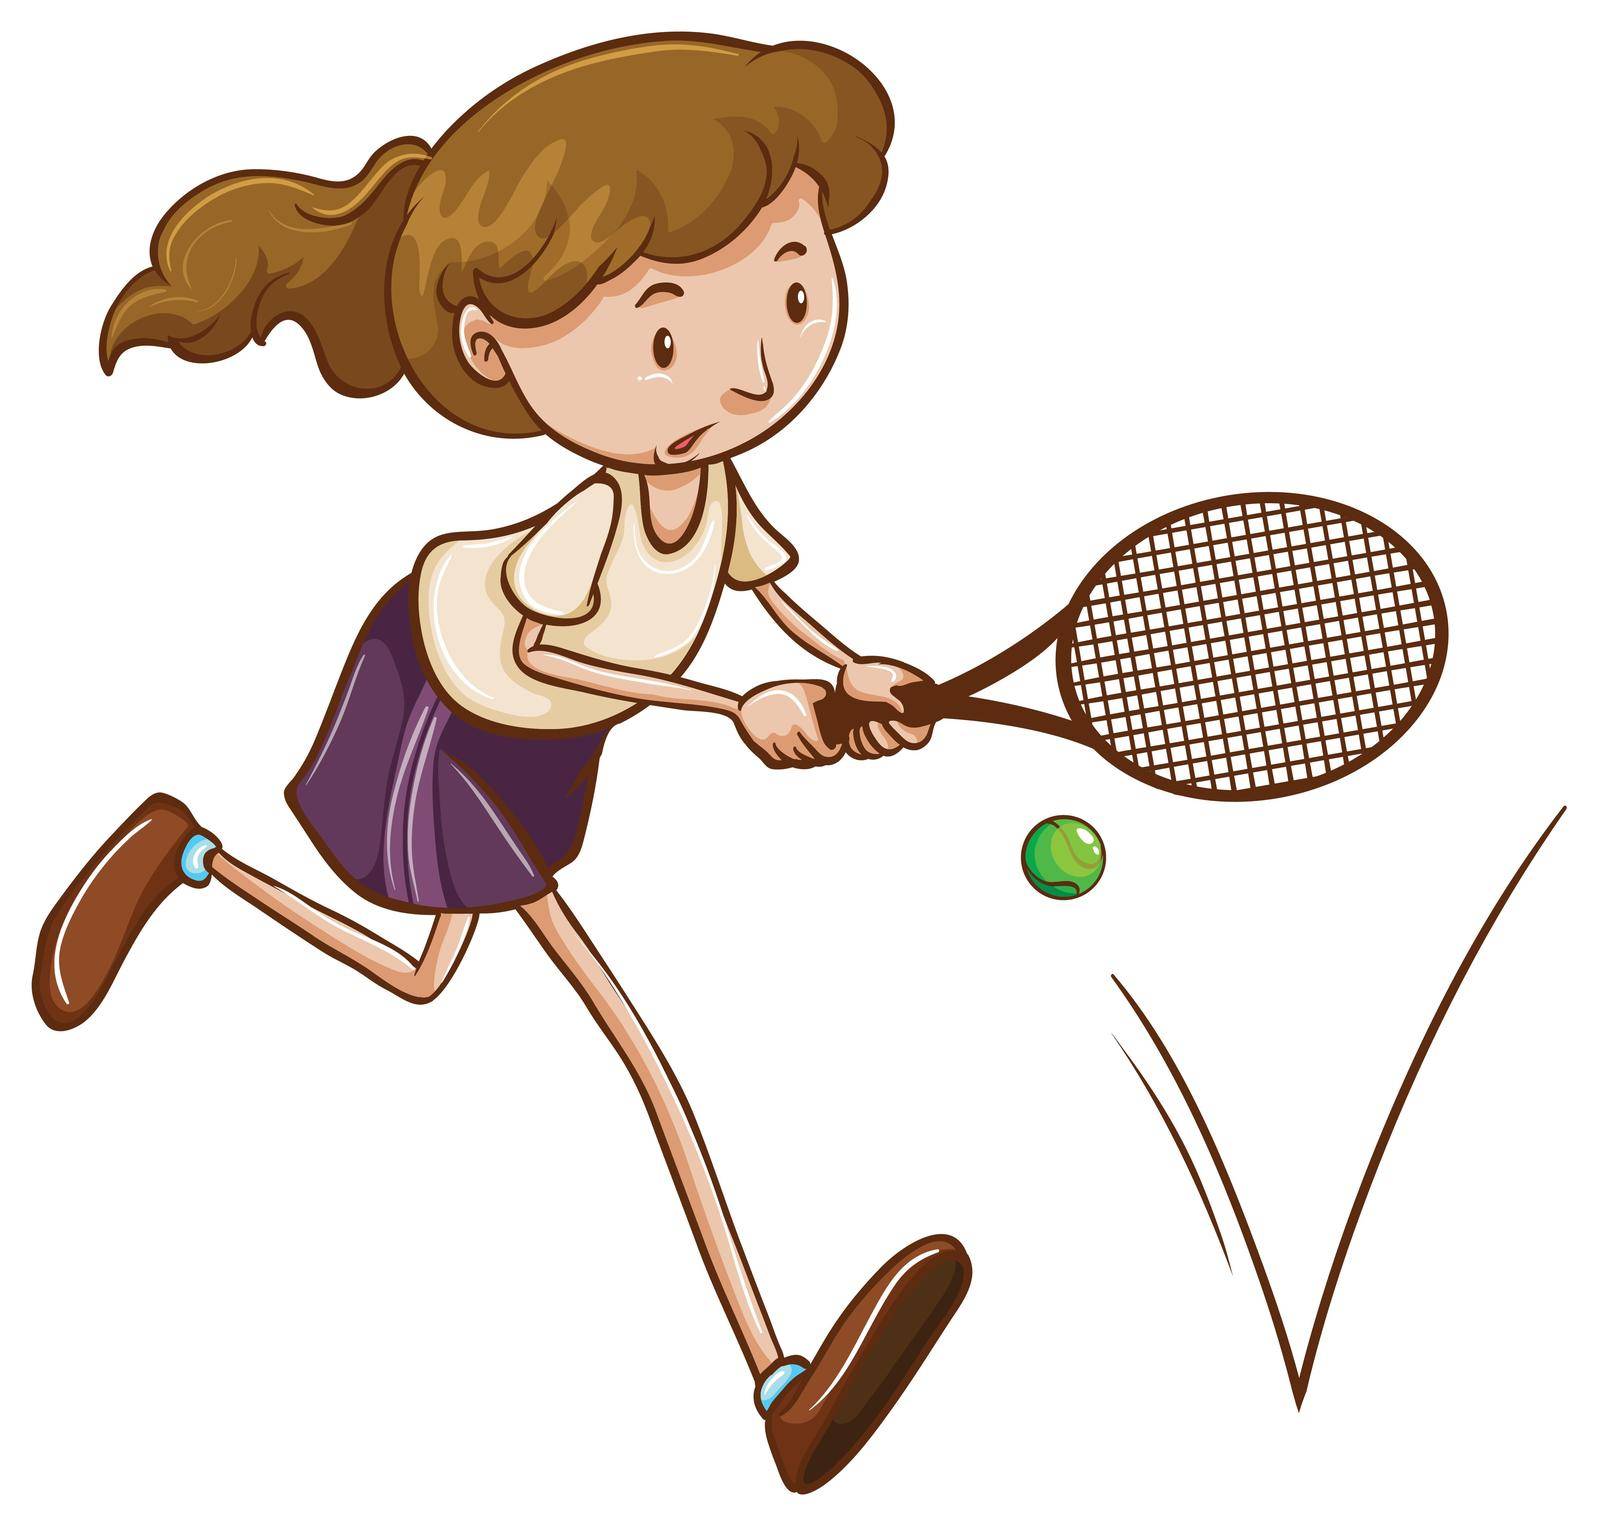 Illustration of a simple sketch of a girl playing tennis on a white background